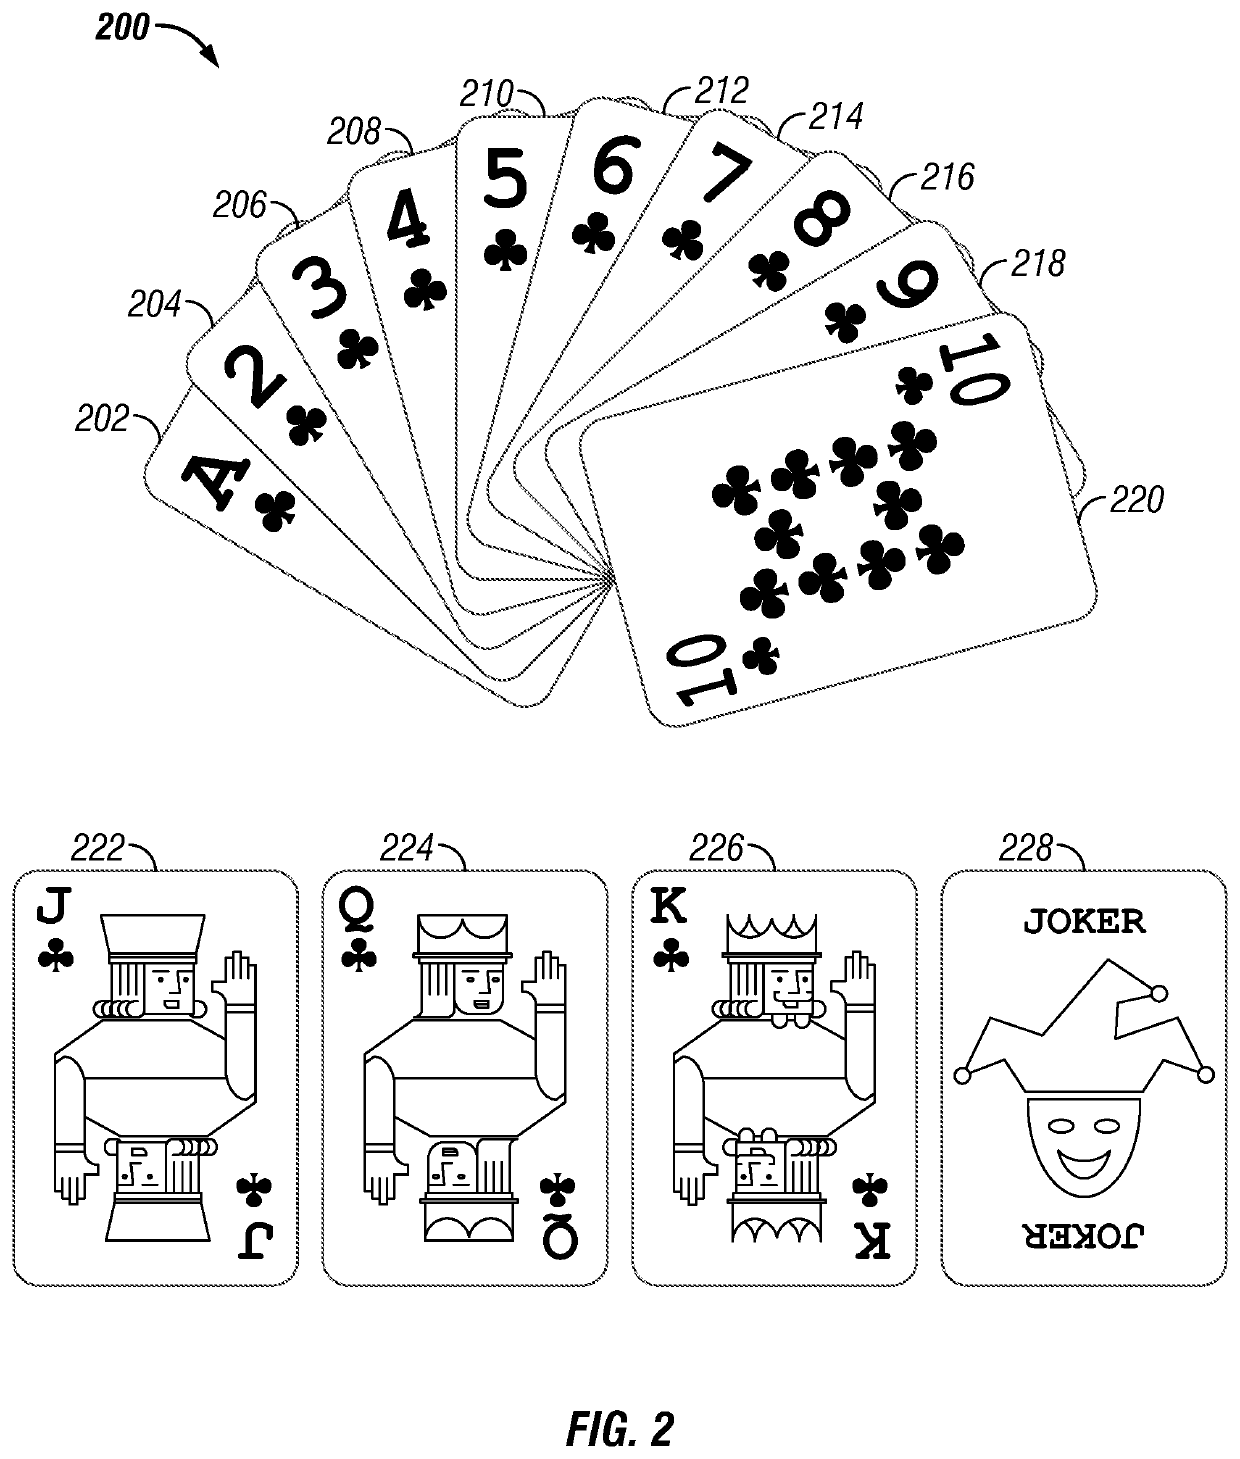 Universal cribbage board for multi-variation cribbage games and method of play